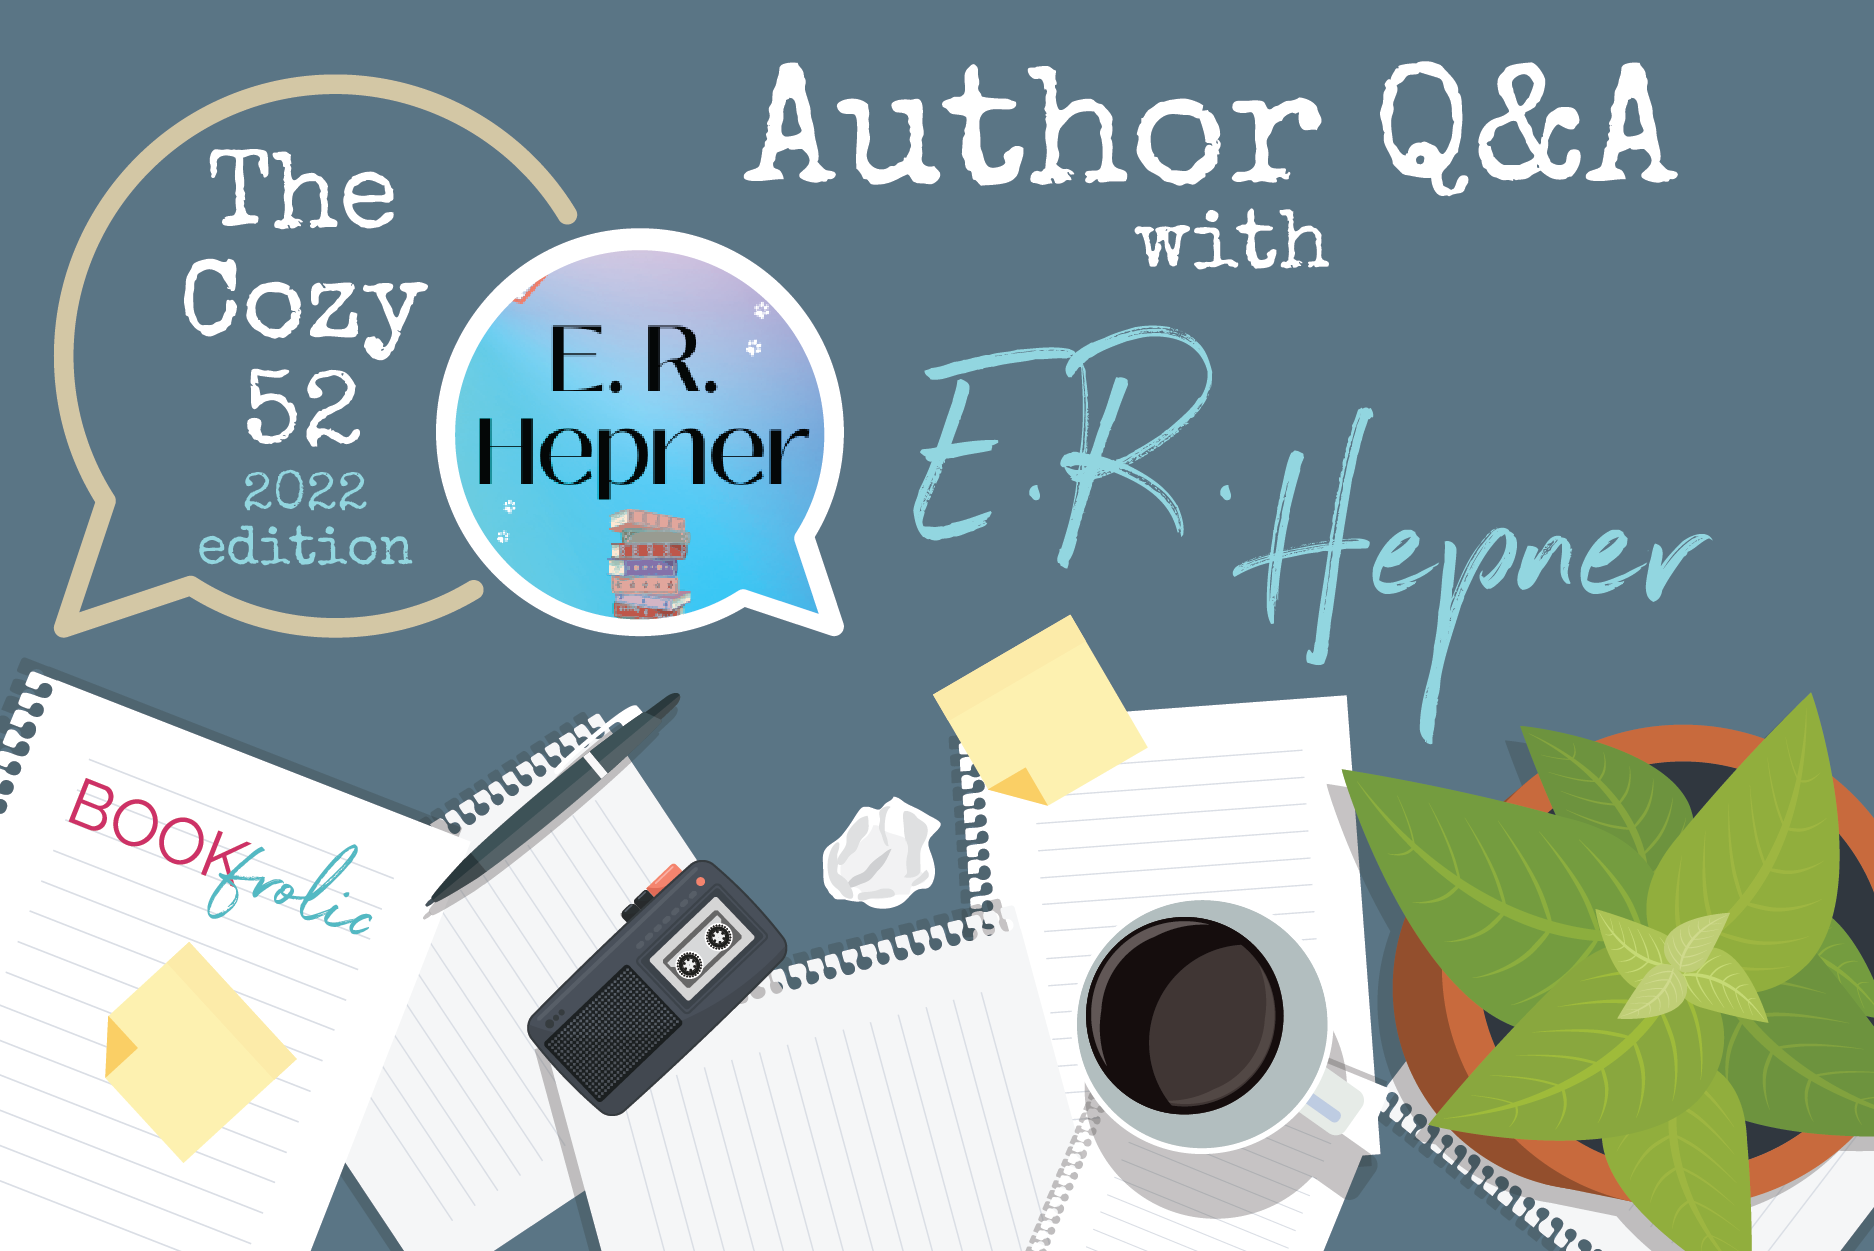 banner for interview with author ER Hepner for The Cozy 52 blog post series